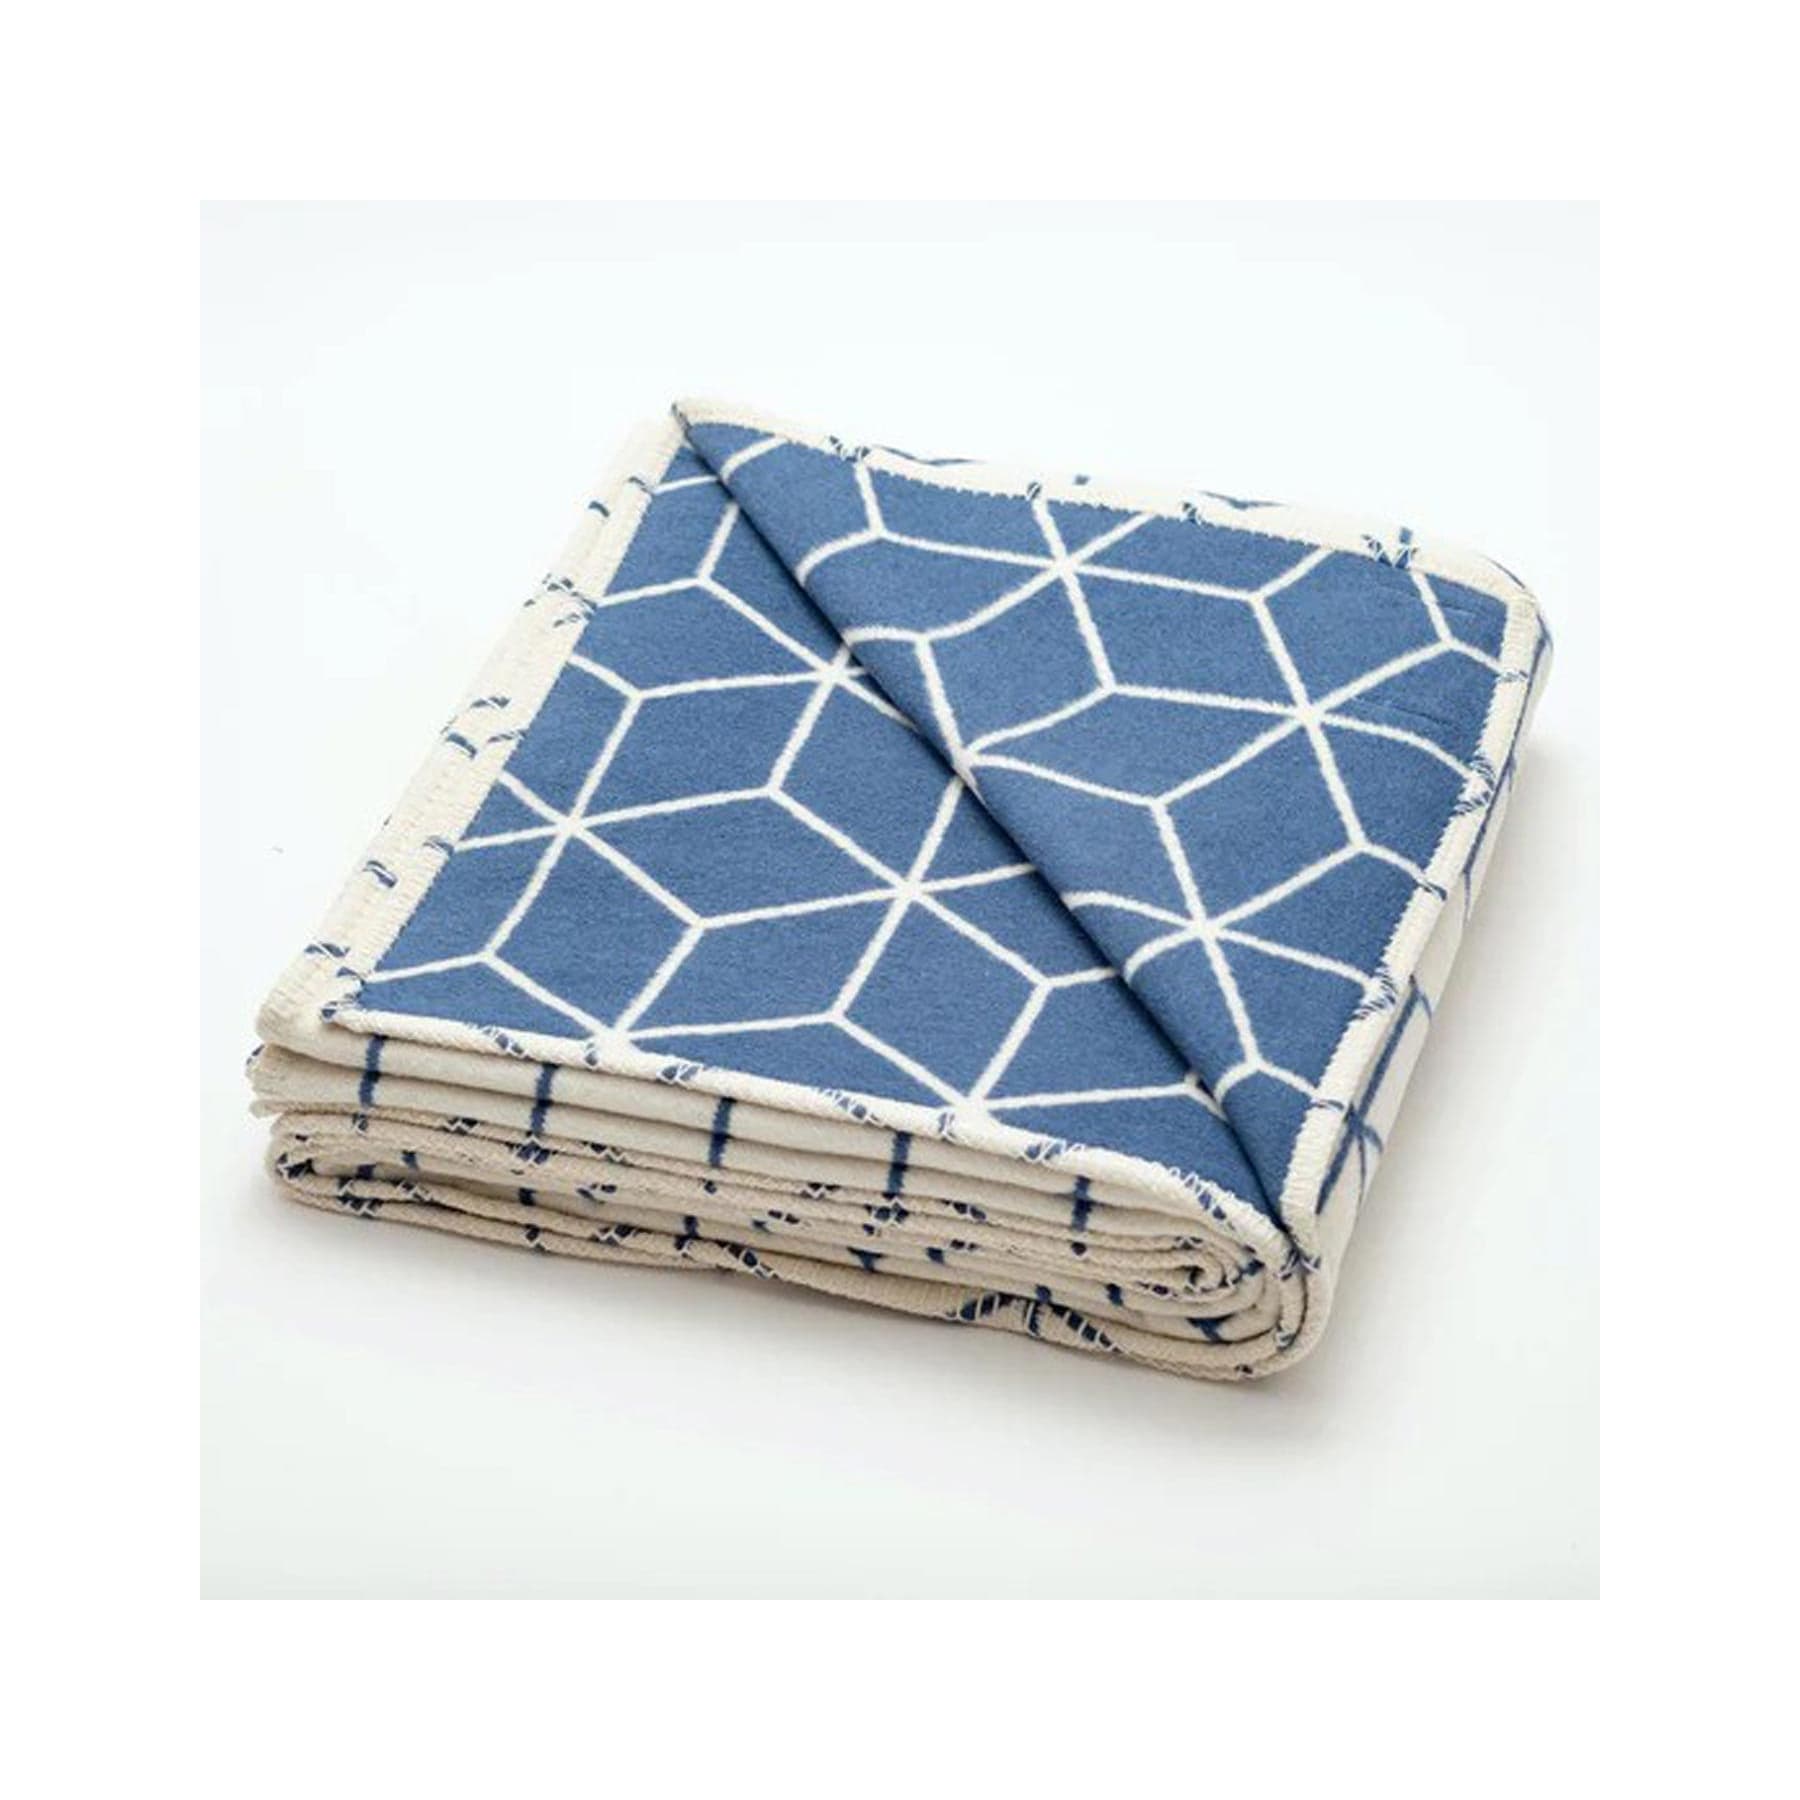 Blue geometric recycled cotton blanket